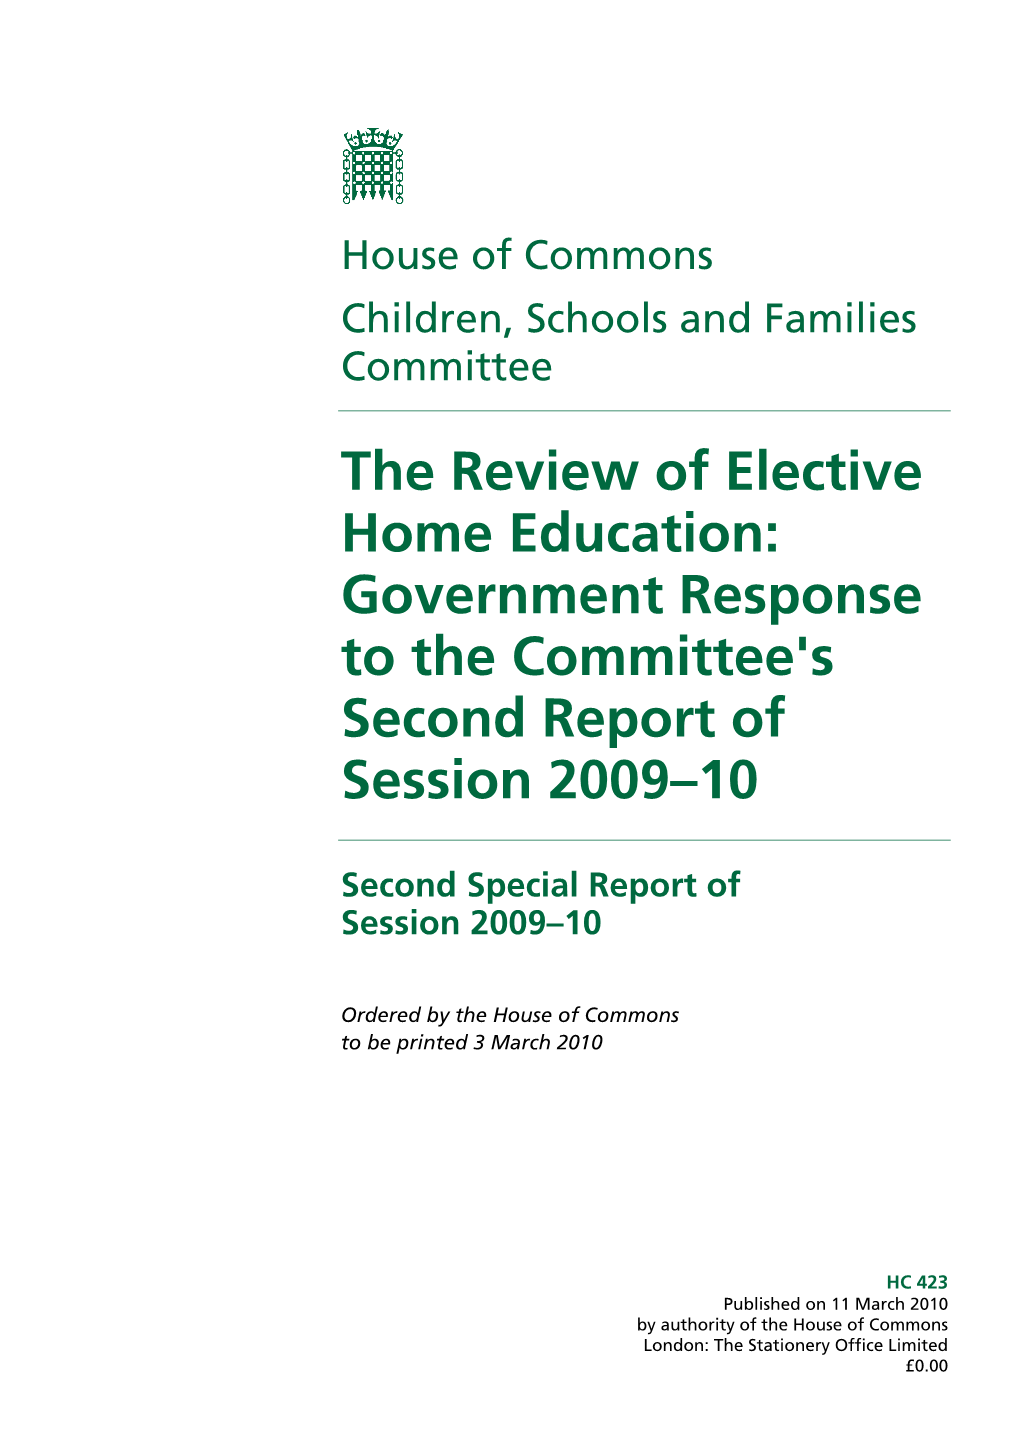 The Review of Elective Home Education: Government Response to the Committee's Second Report of Session 2009–10